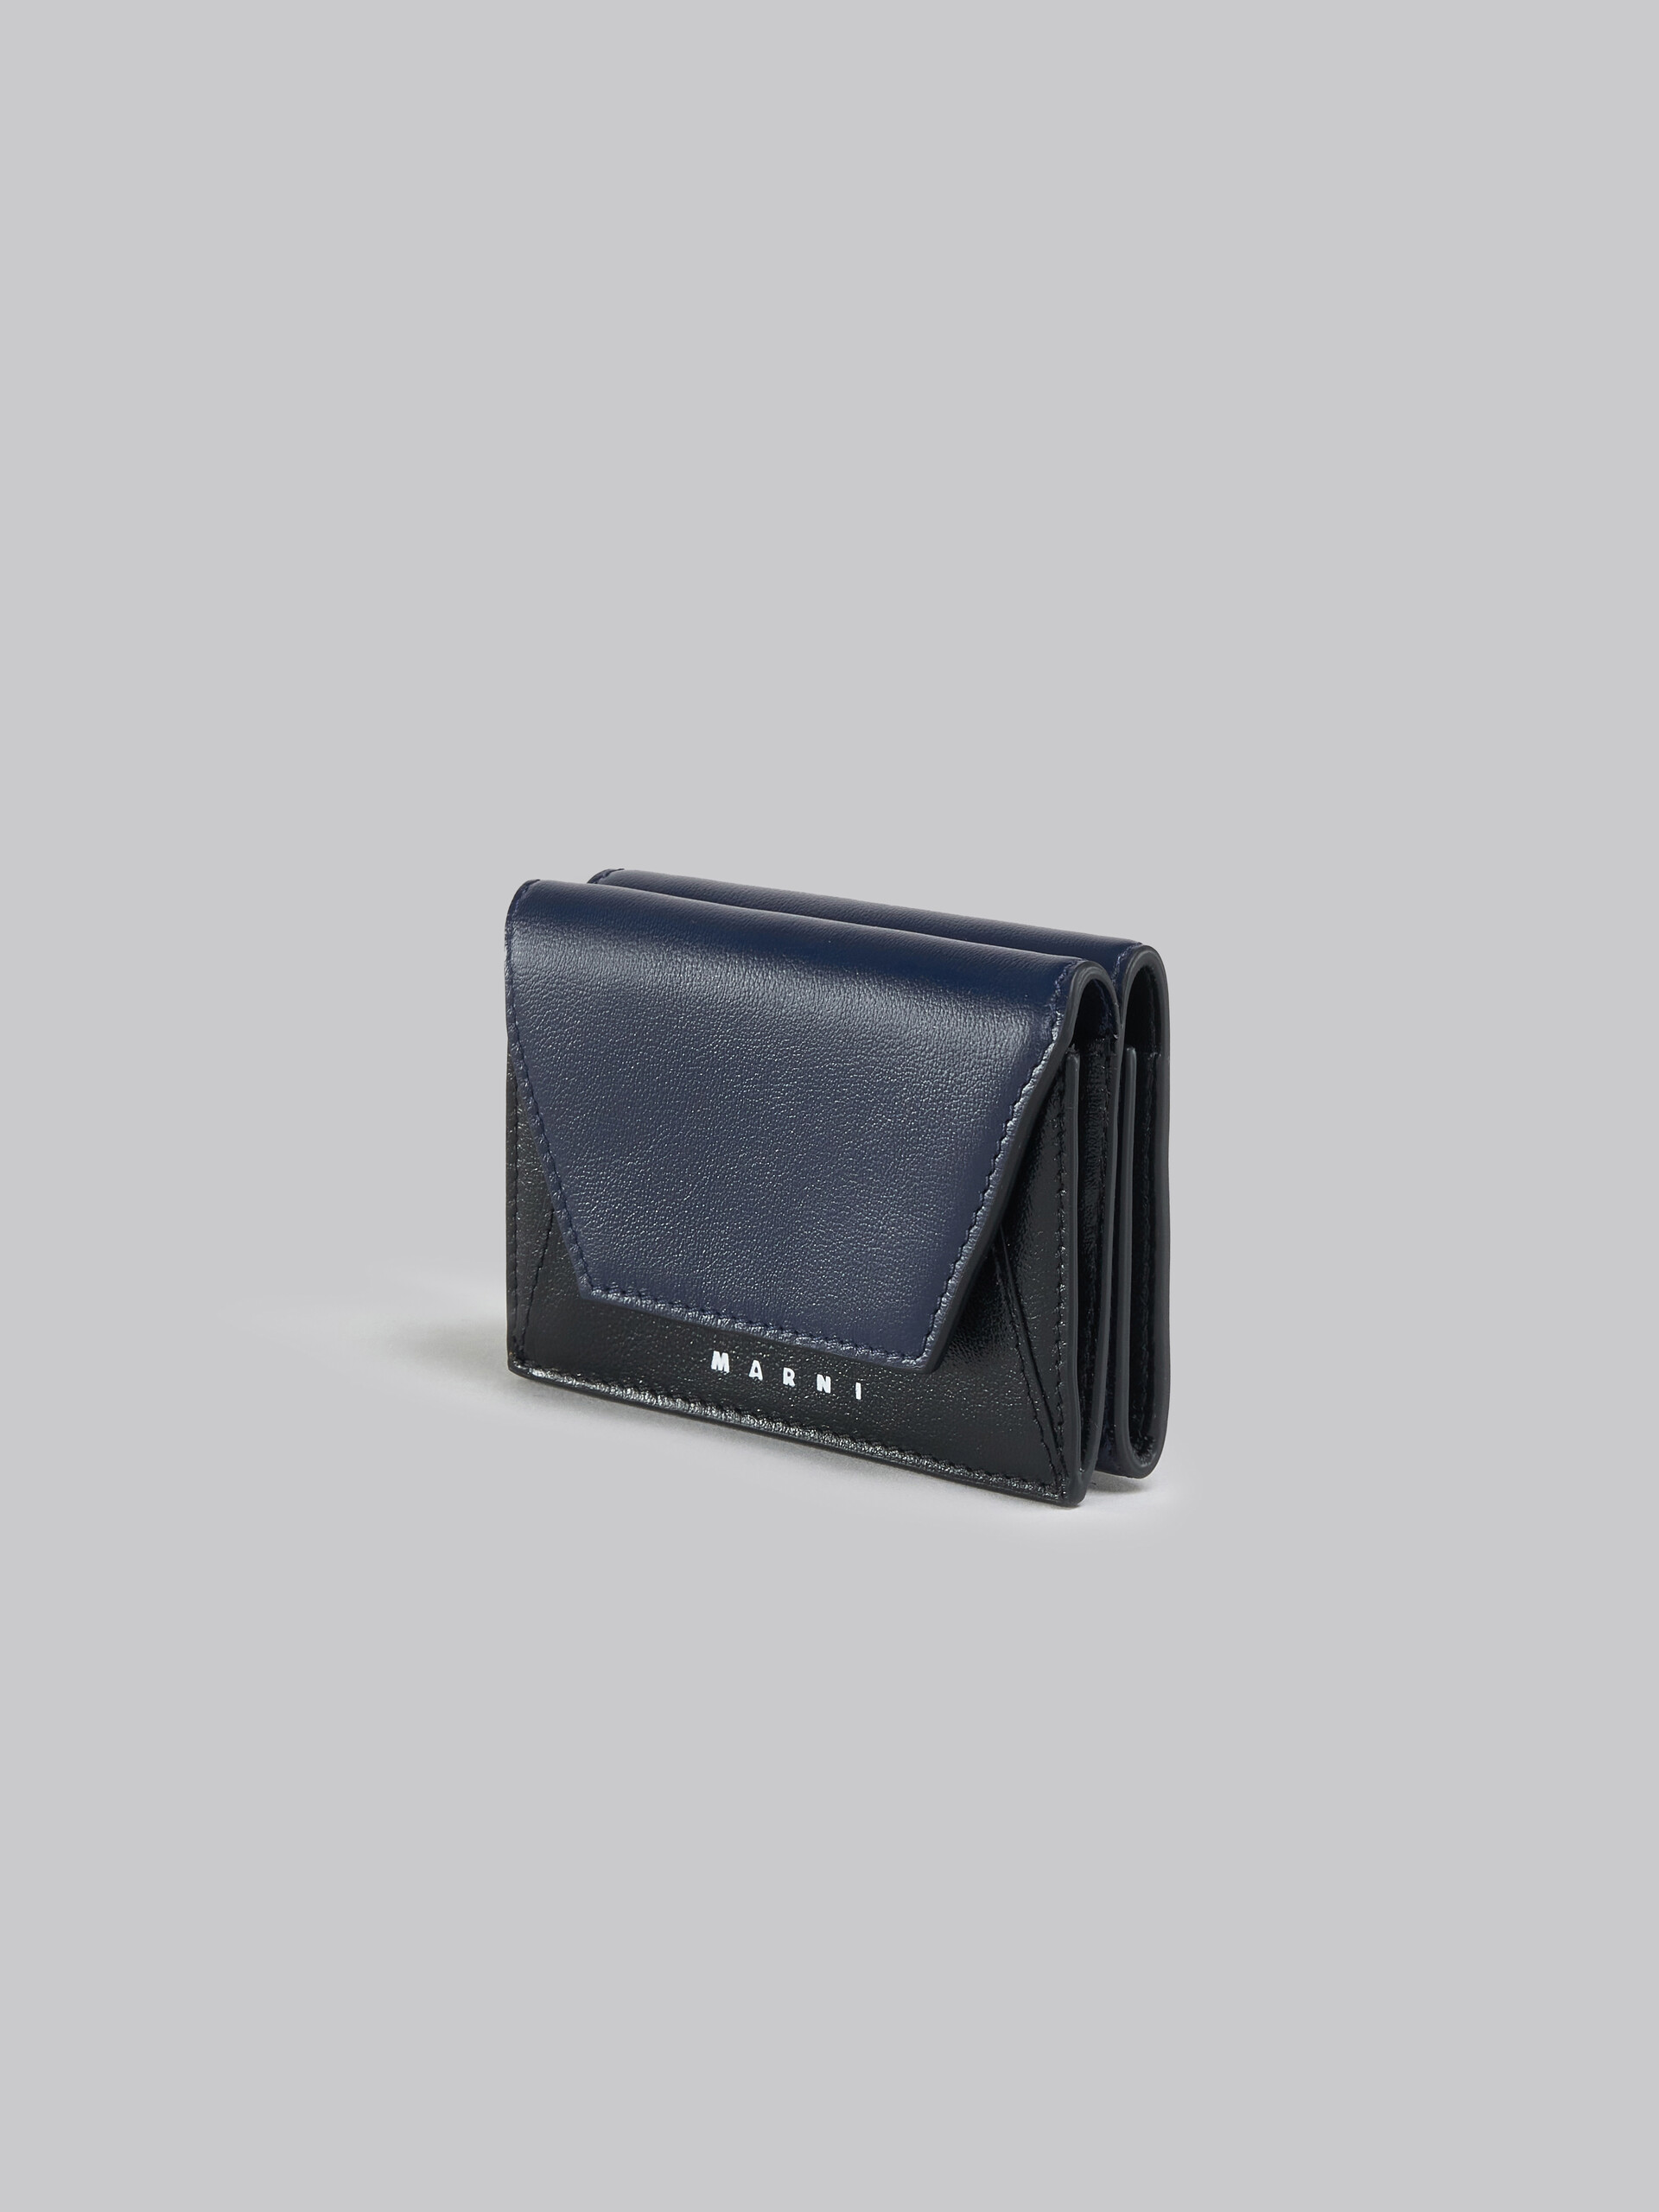 Navy blue and black leather tri-fold wallet - Wallets - Image 4